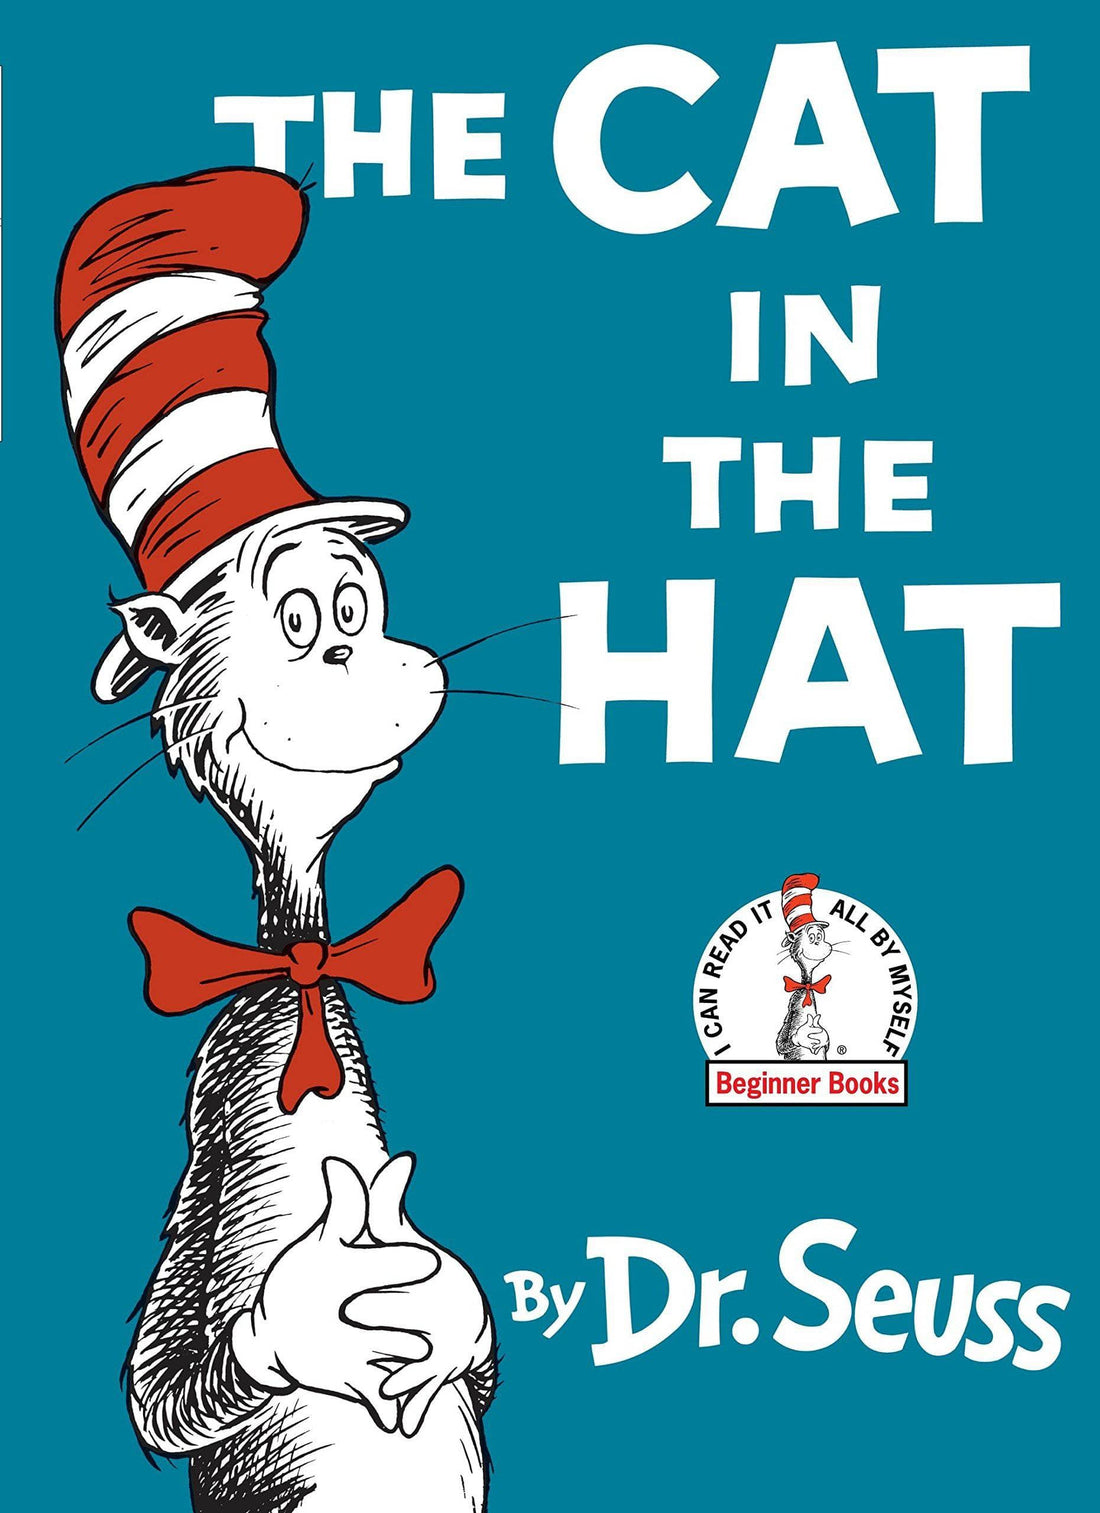 Dr. Seuss and The Cat in the Hat: A Children's Book Overview